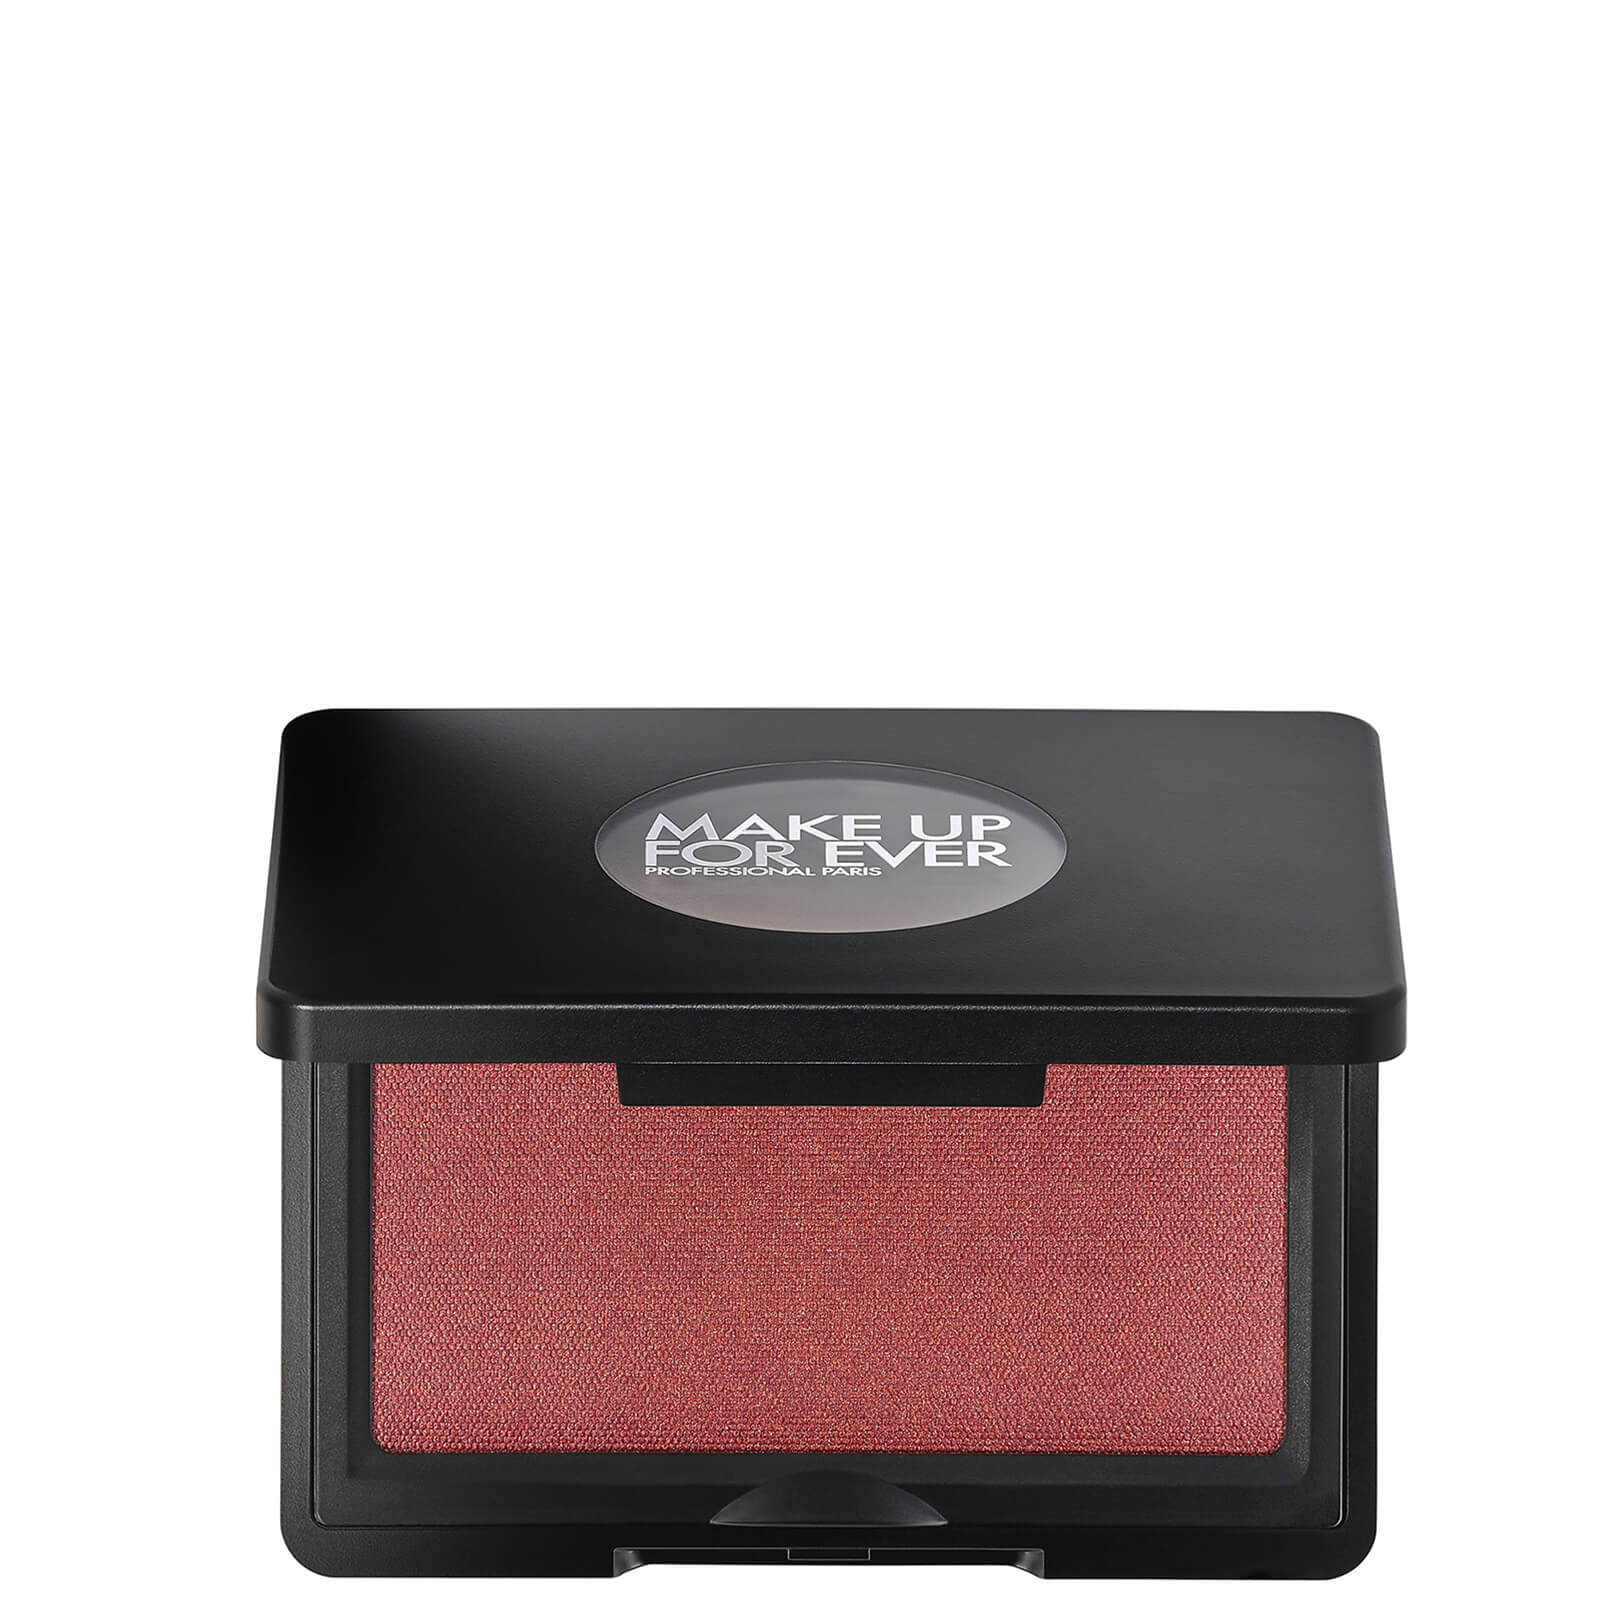 MAKE UP FOR EVER Artist Face Powders Blush 4g (Various Shades) - B240 - Cheeky Cherry